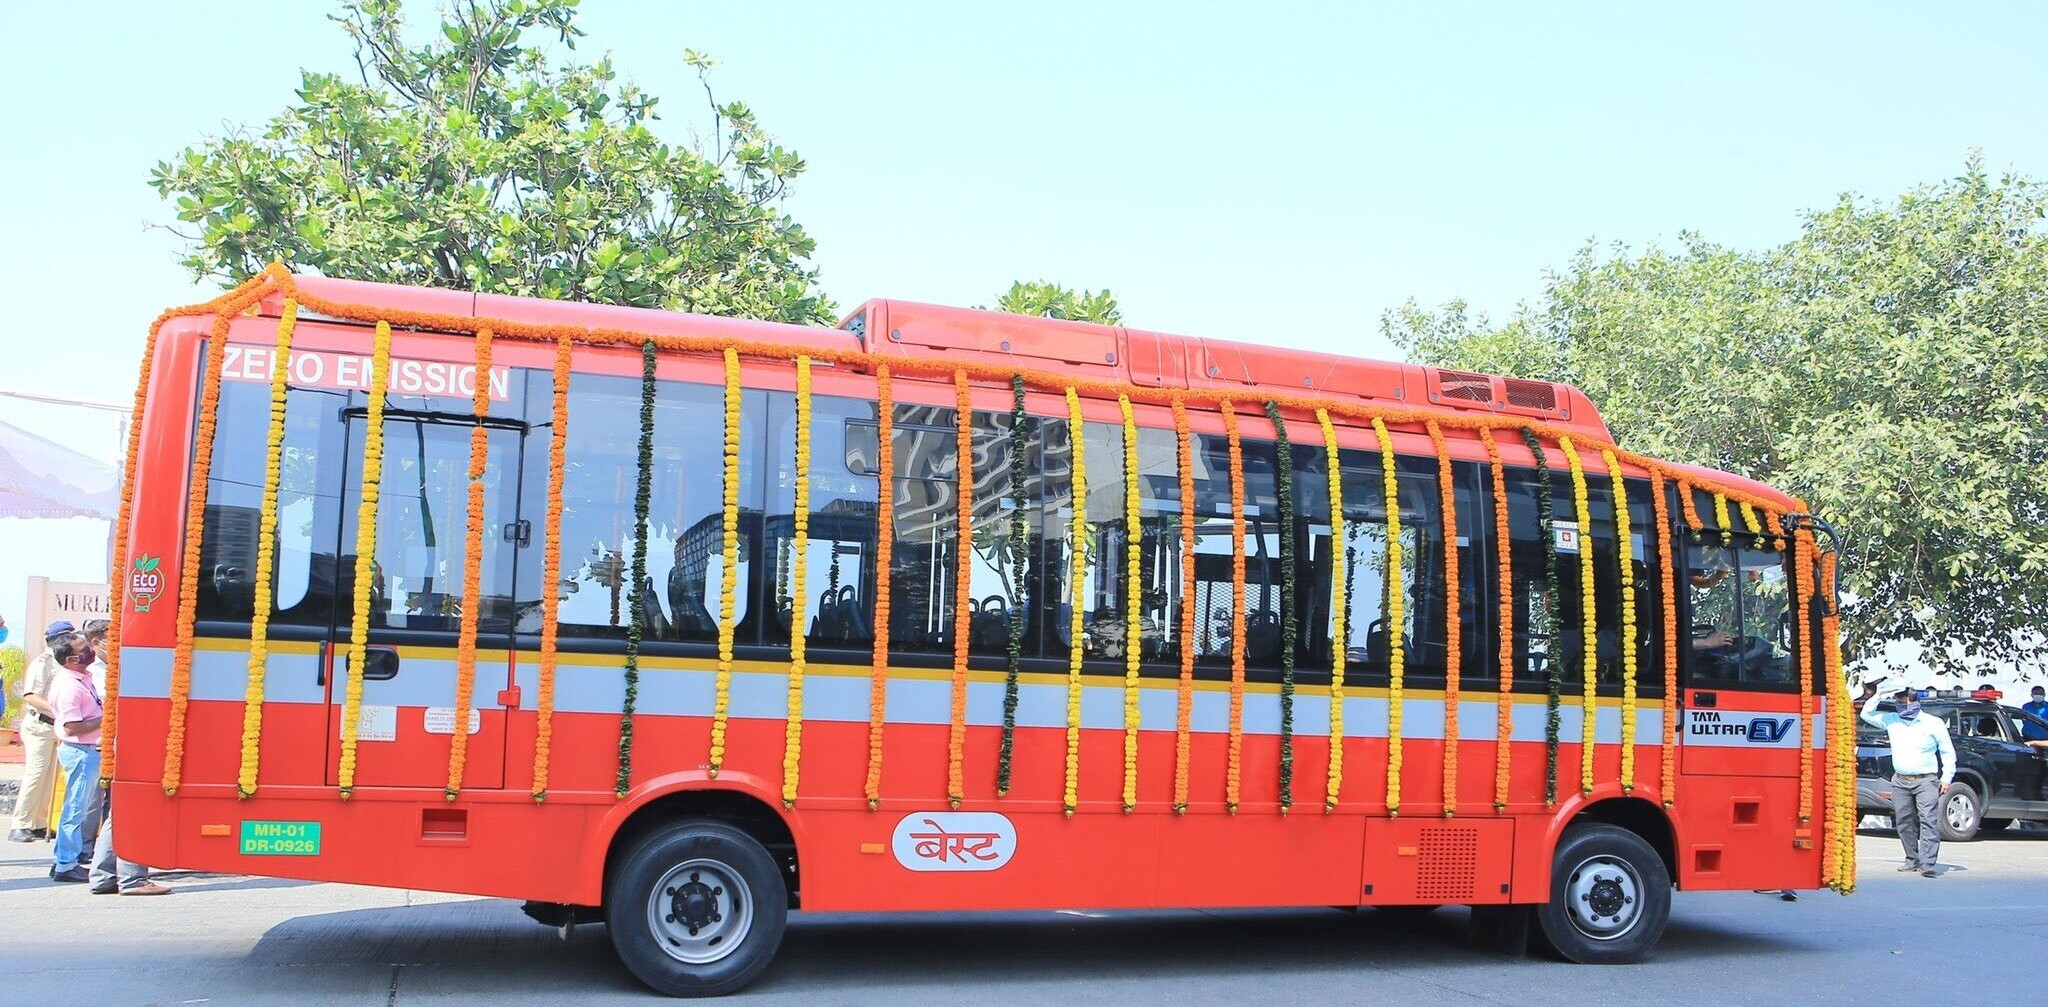 Mumbai wants India’s EV crown — and it’s buying 1,900 buses to prove it